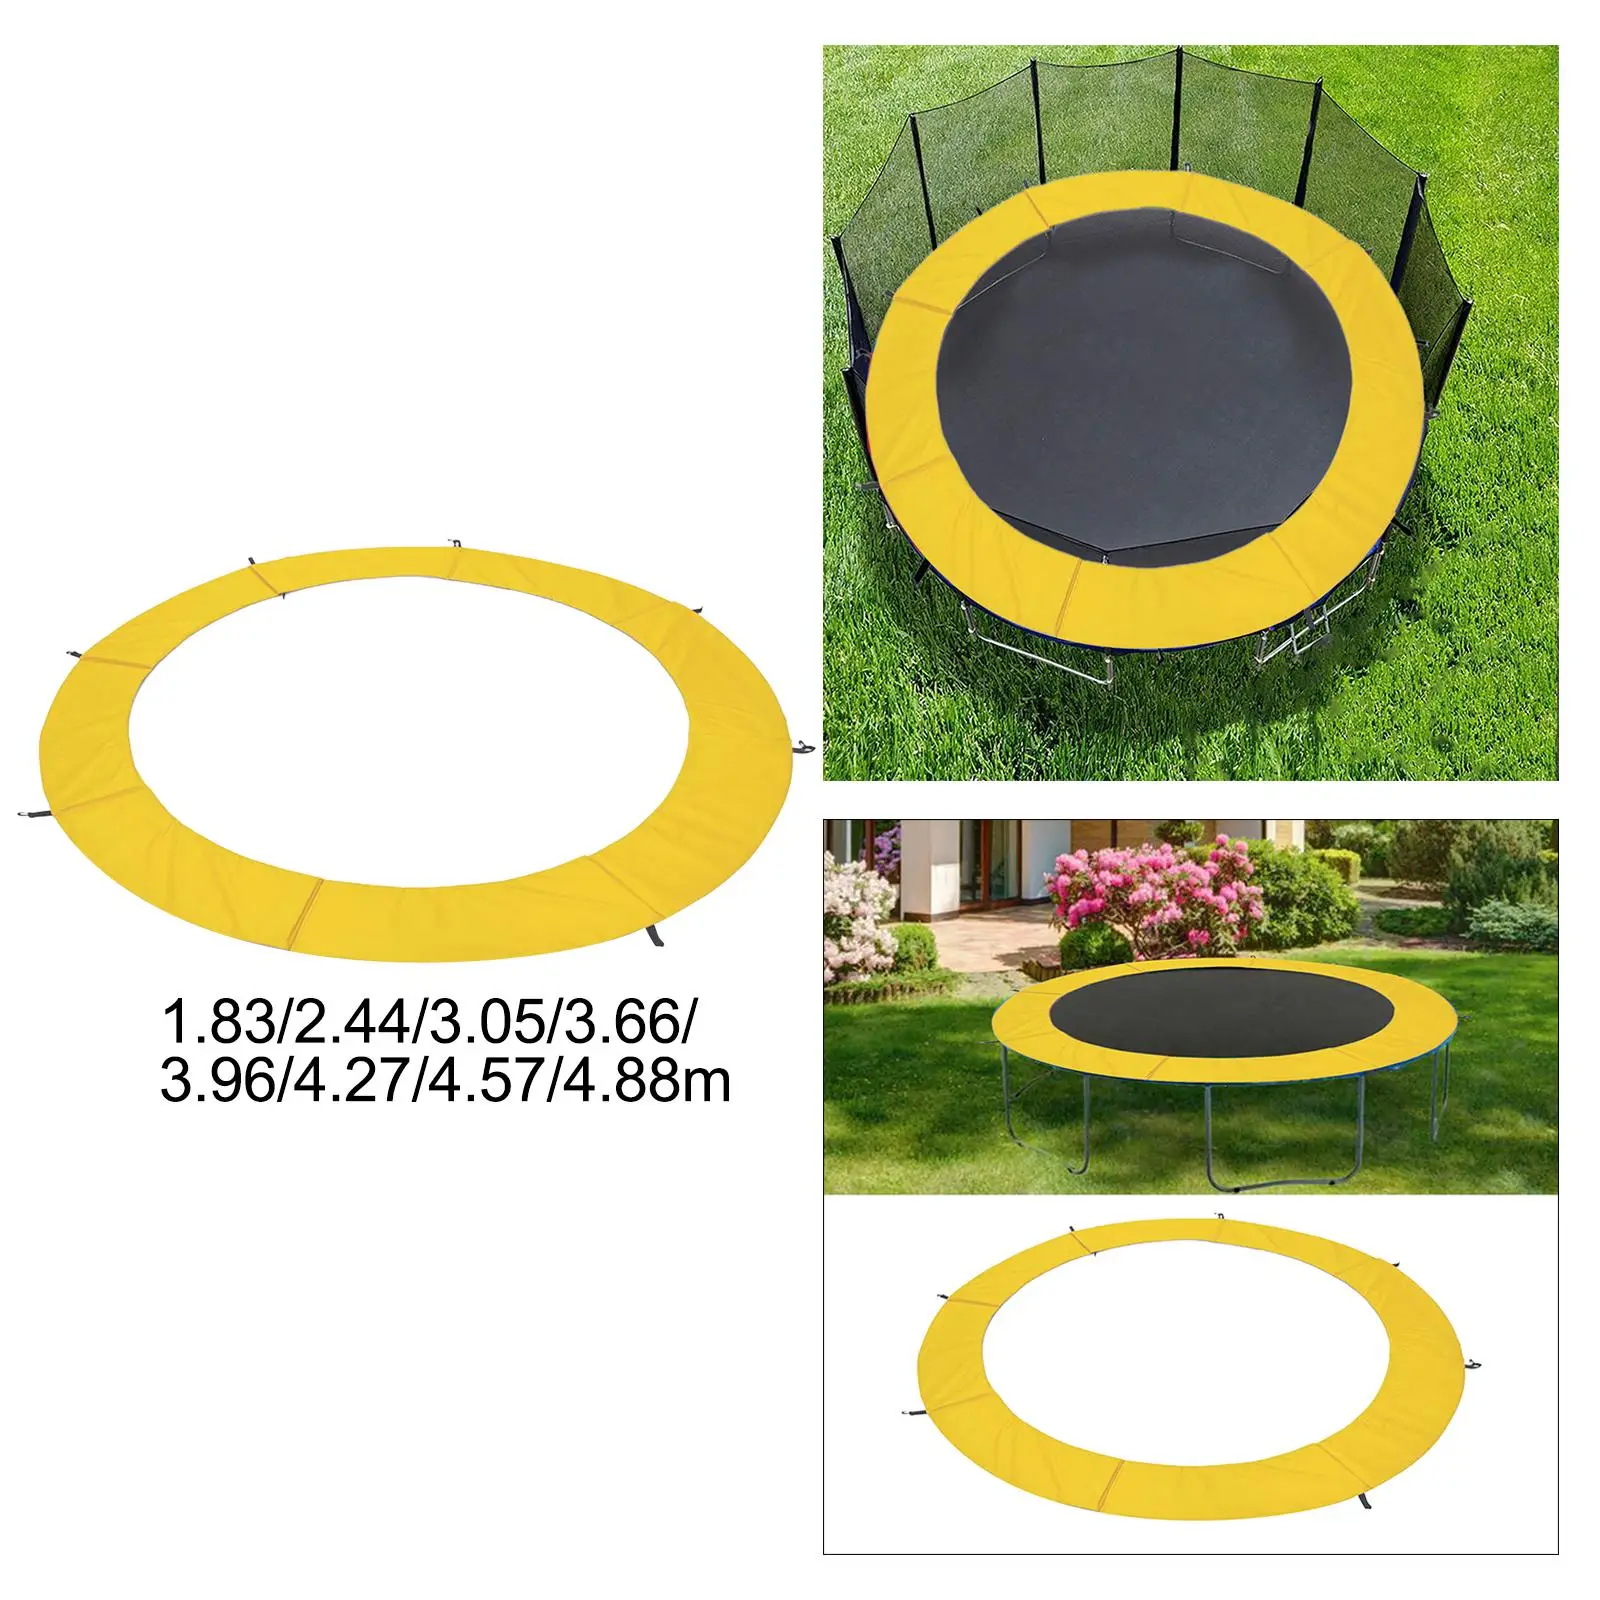 Trampoline Pad Cover Replacement Side Guard Trampoline Cover for Edge Protection Easy to Install